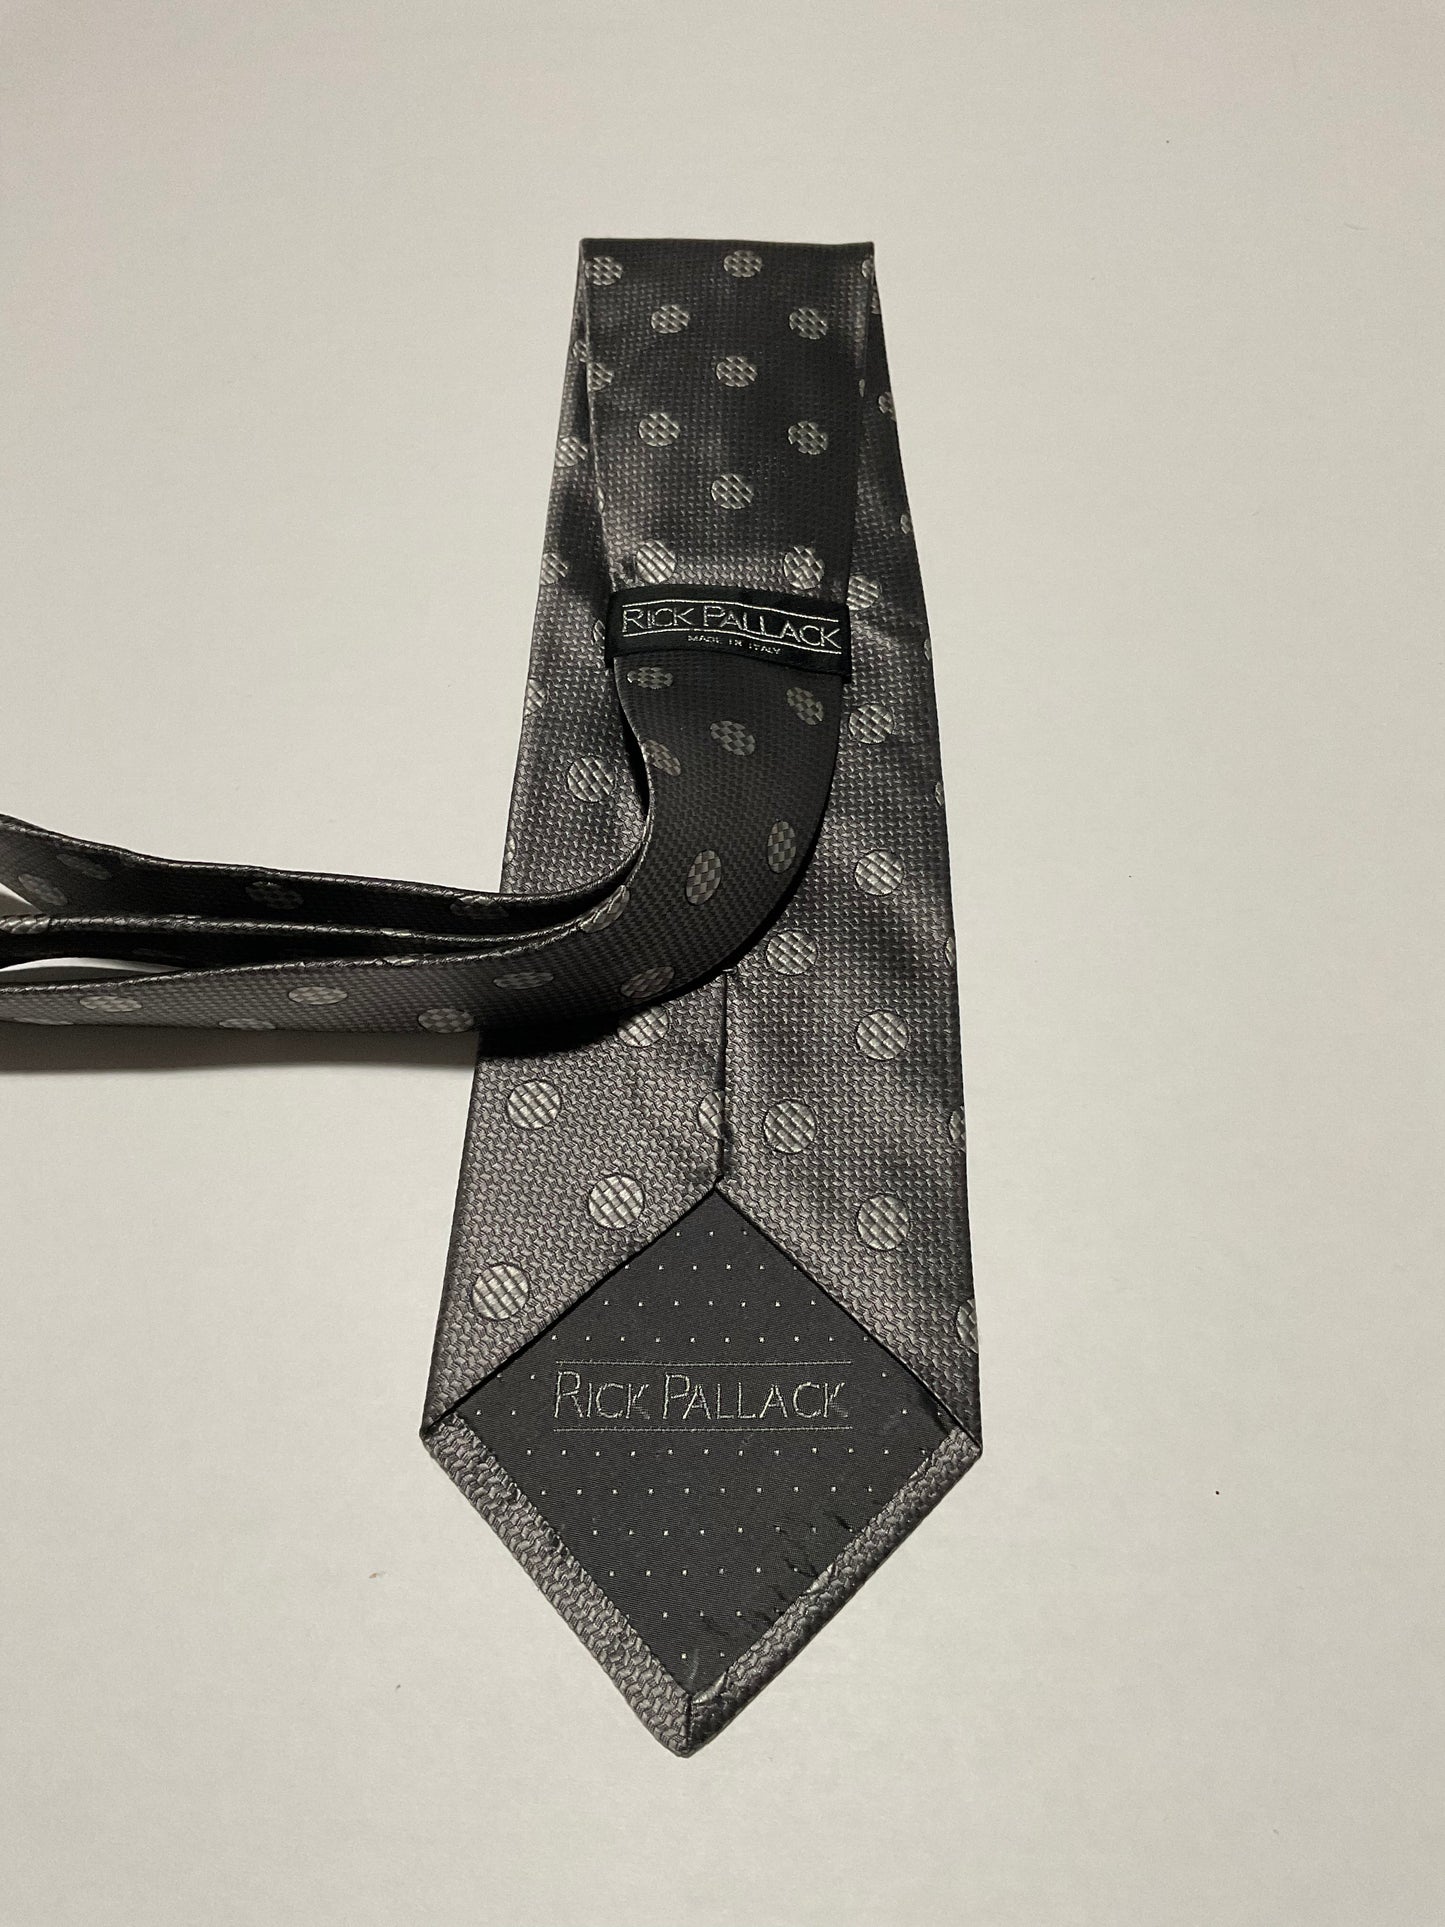 R P TIE / PURE SILK / NEW / APPX. 3 3/4” WIDE / HAND MADE IN ITALY